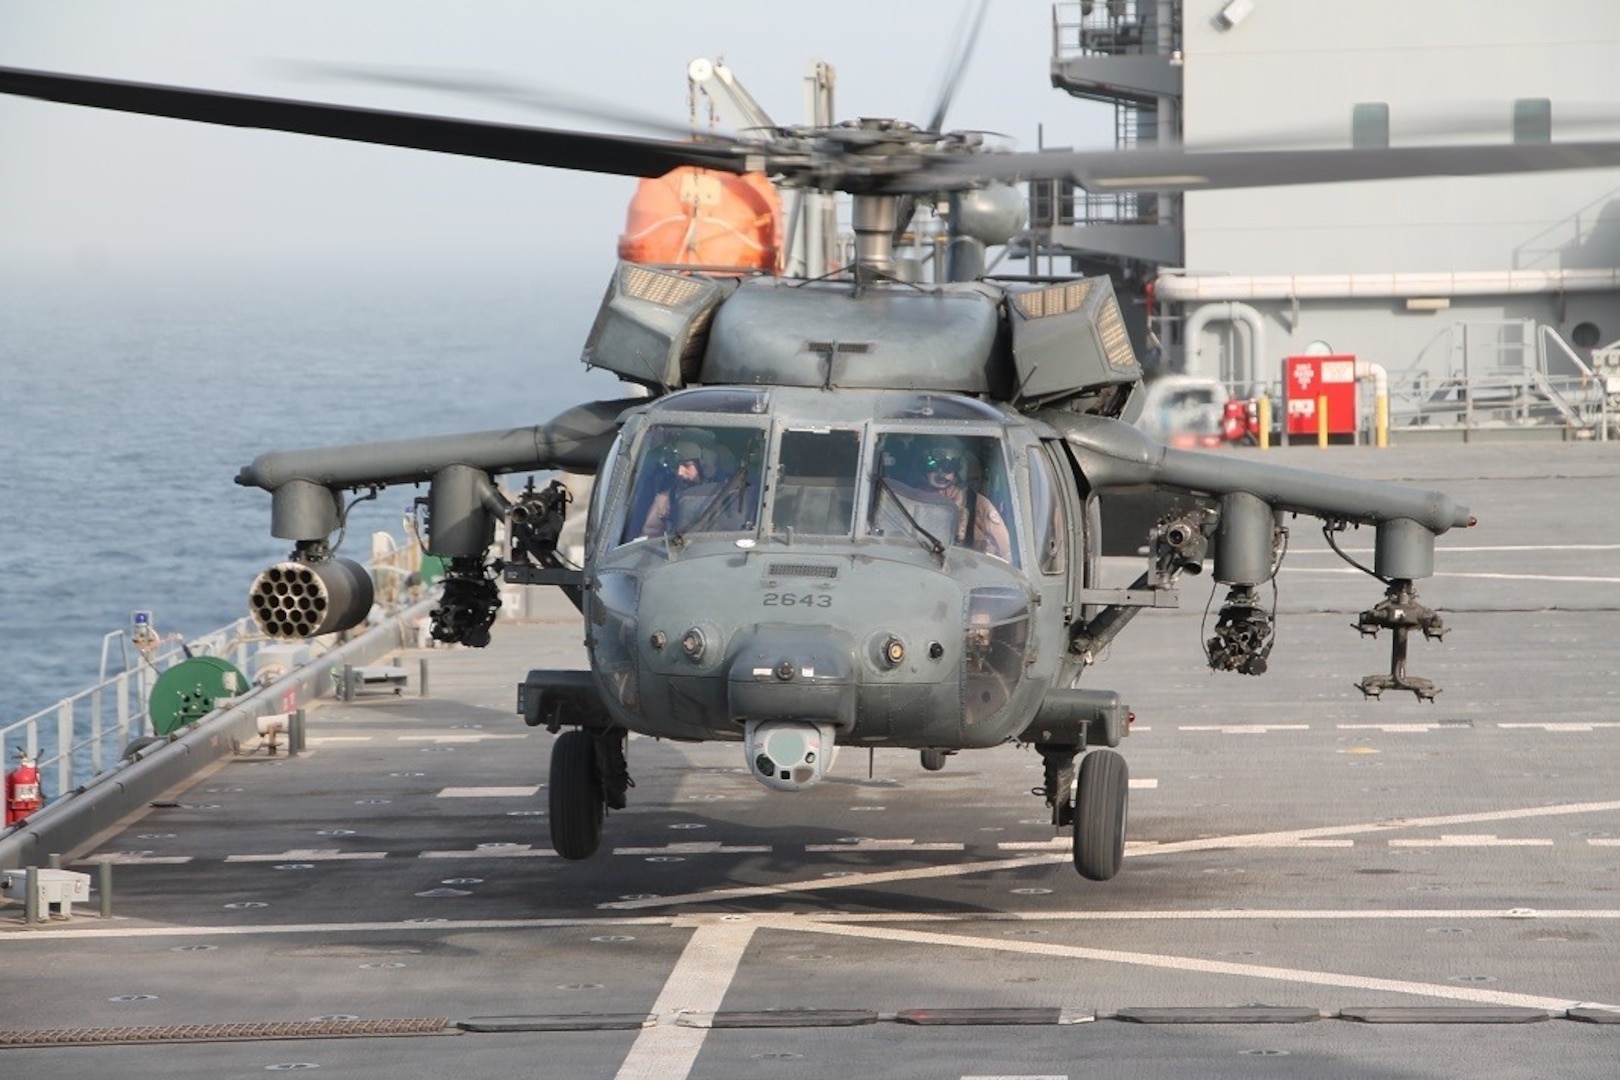 SOUTHERN ARABIAN GULF (May 11, 2020) A UH-60M helicopter attached to the United Arab Emirates (UAE) Joint Aviation Command (JAC) lands aboard the expeditionary sea base USS Lewis B. Puller (ESB 3). Lewis B. Puller is deployed to the U.S. 5th Fleet area of operations in support of naval operations to ensure maritime stability and security in the Central Region, connecting the Mediterranean and Pacific through the Western Indian Ocean and three strategic choke points. (U.S. Navy photo by Chief Logistics Specialist Thomas Joyce)